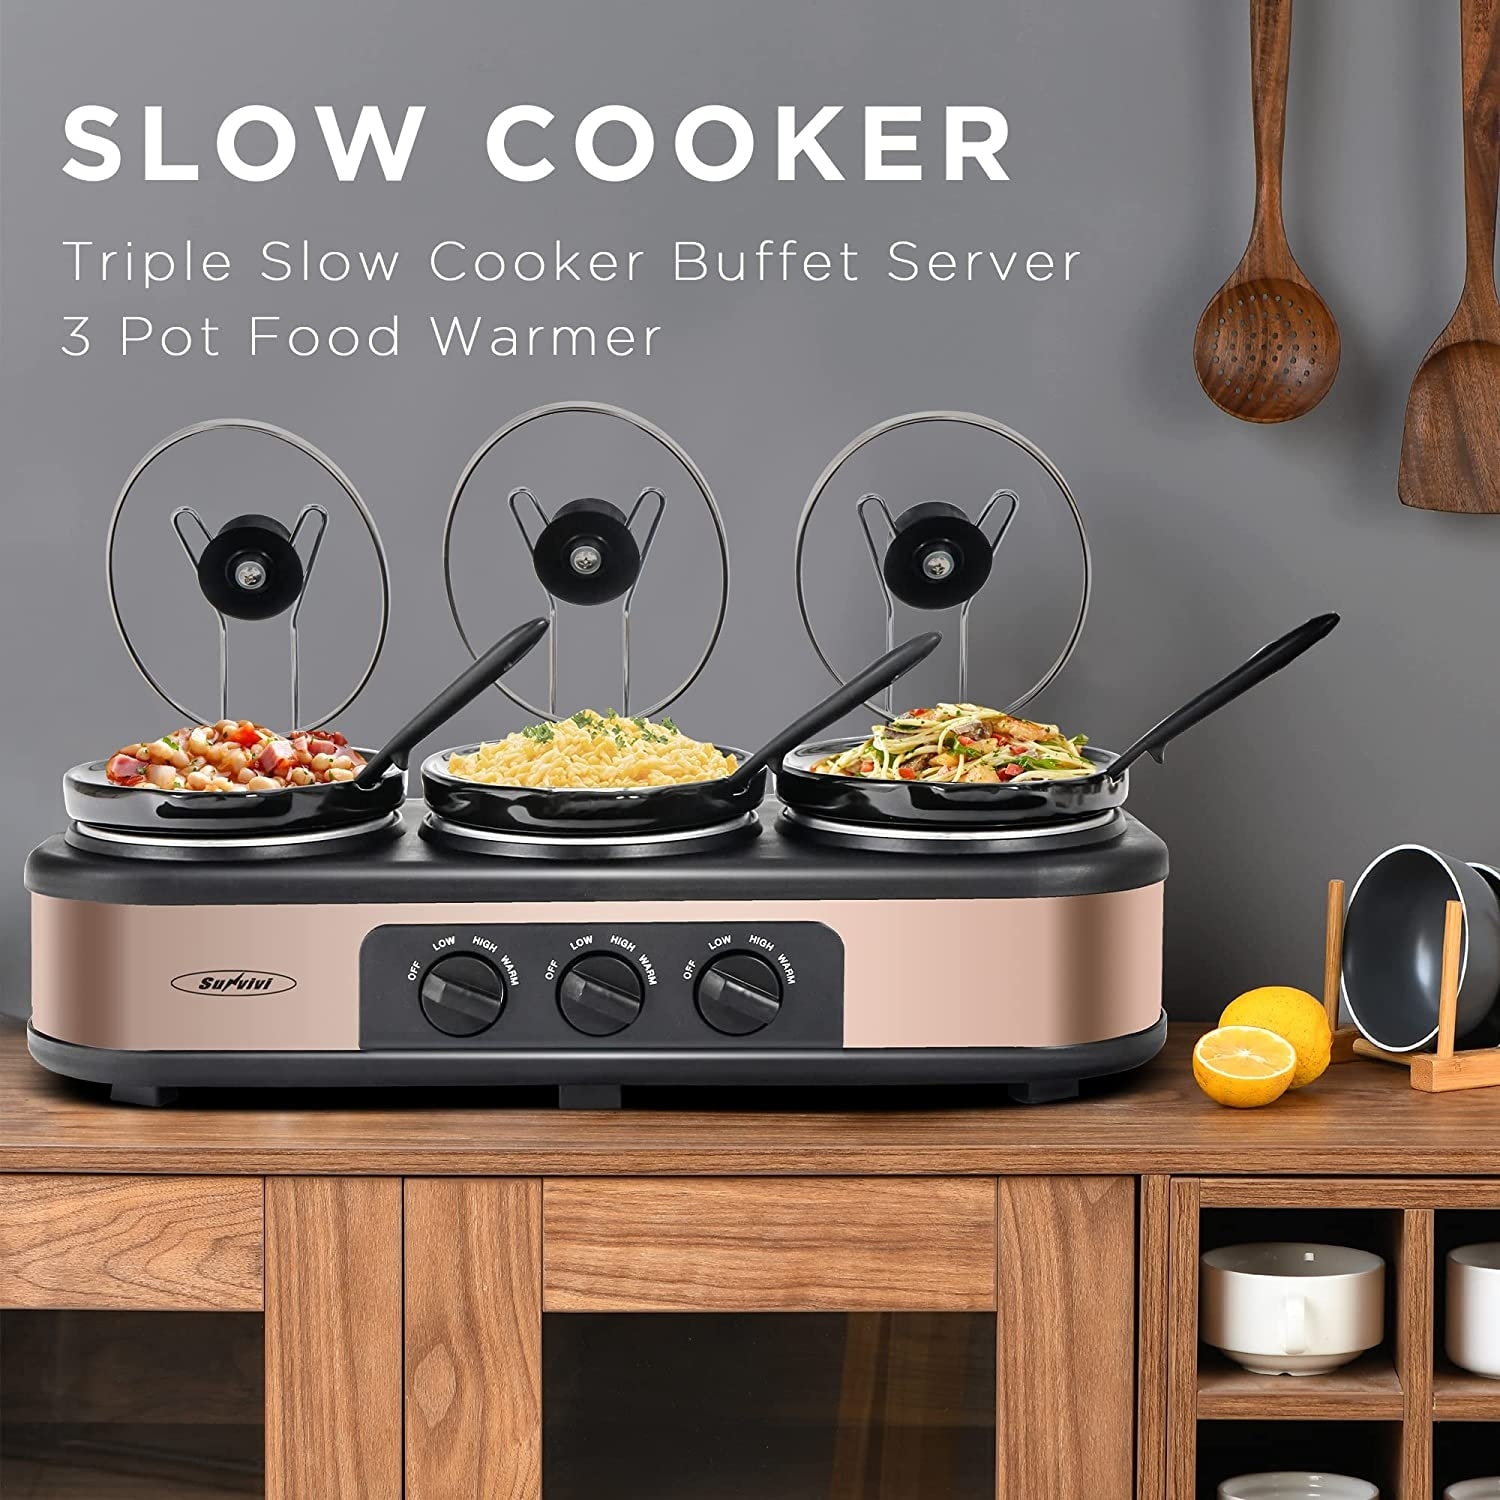 Ovente Stainless Steel Triple Slow Cooker Buffet Server, 3 Section Station  4.5 QT Ceramic Pot Food